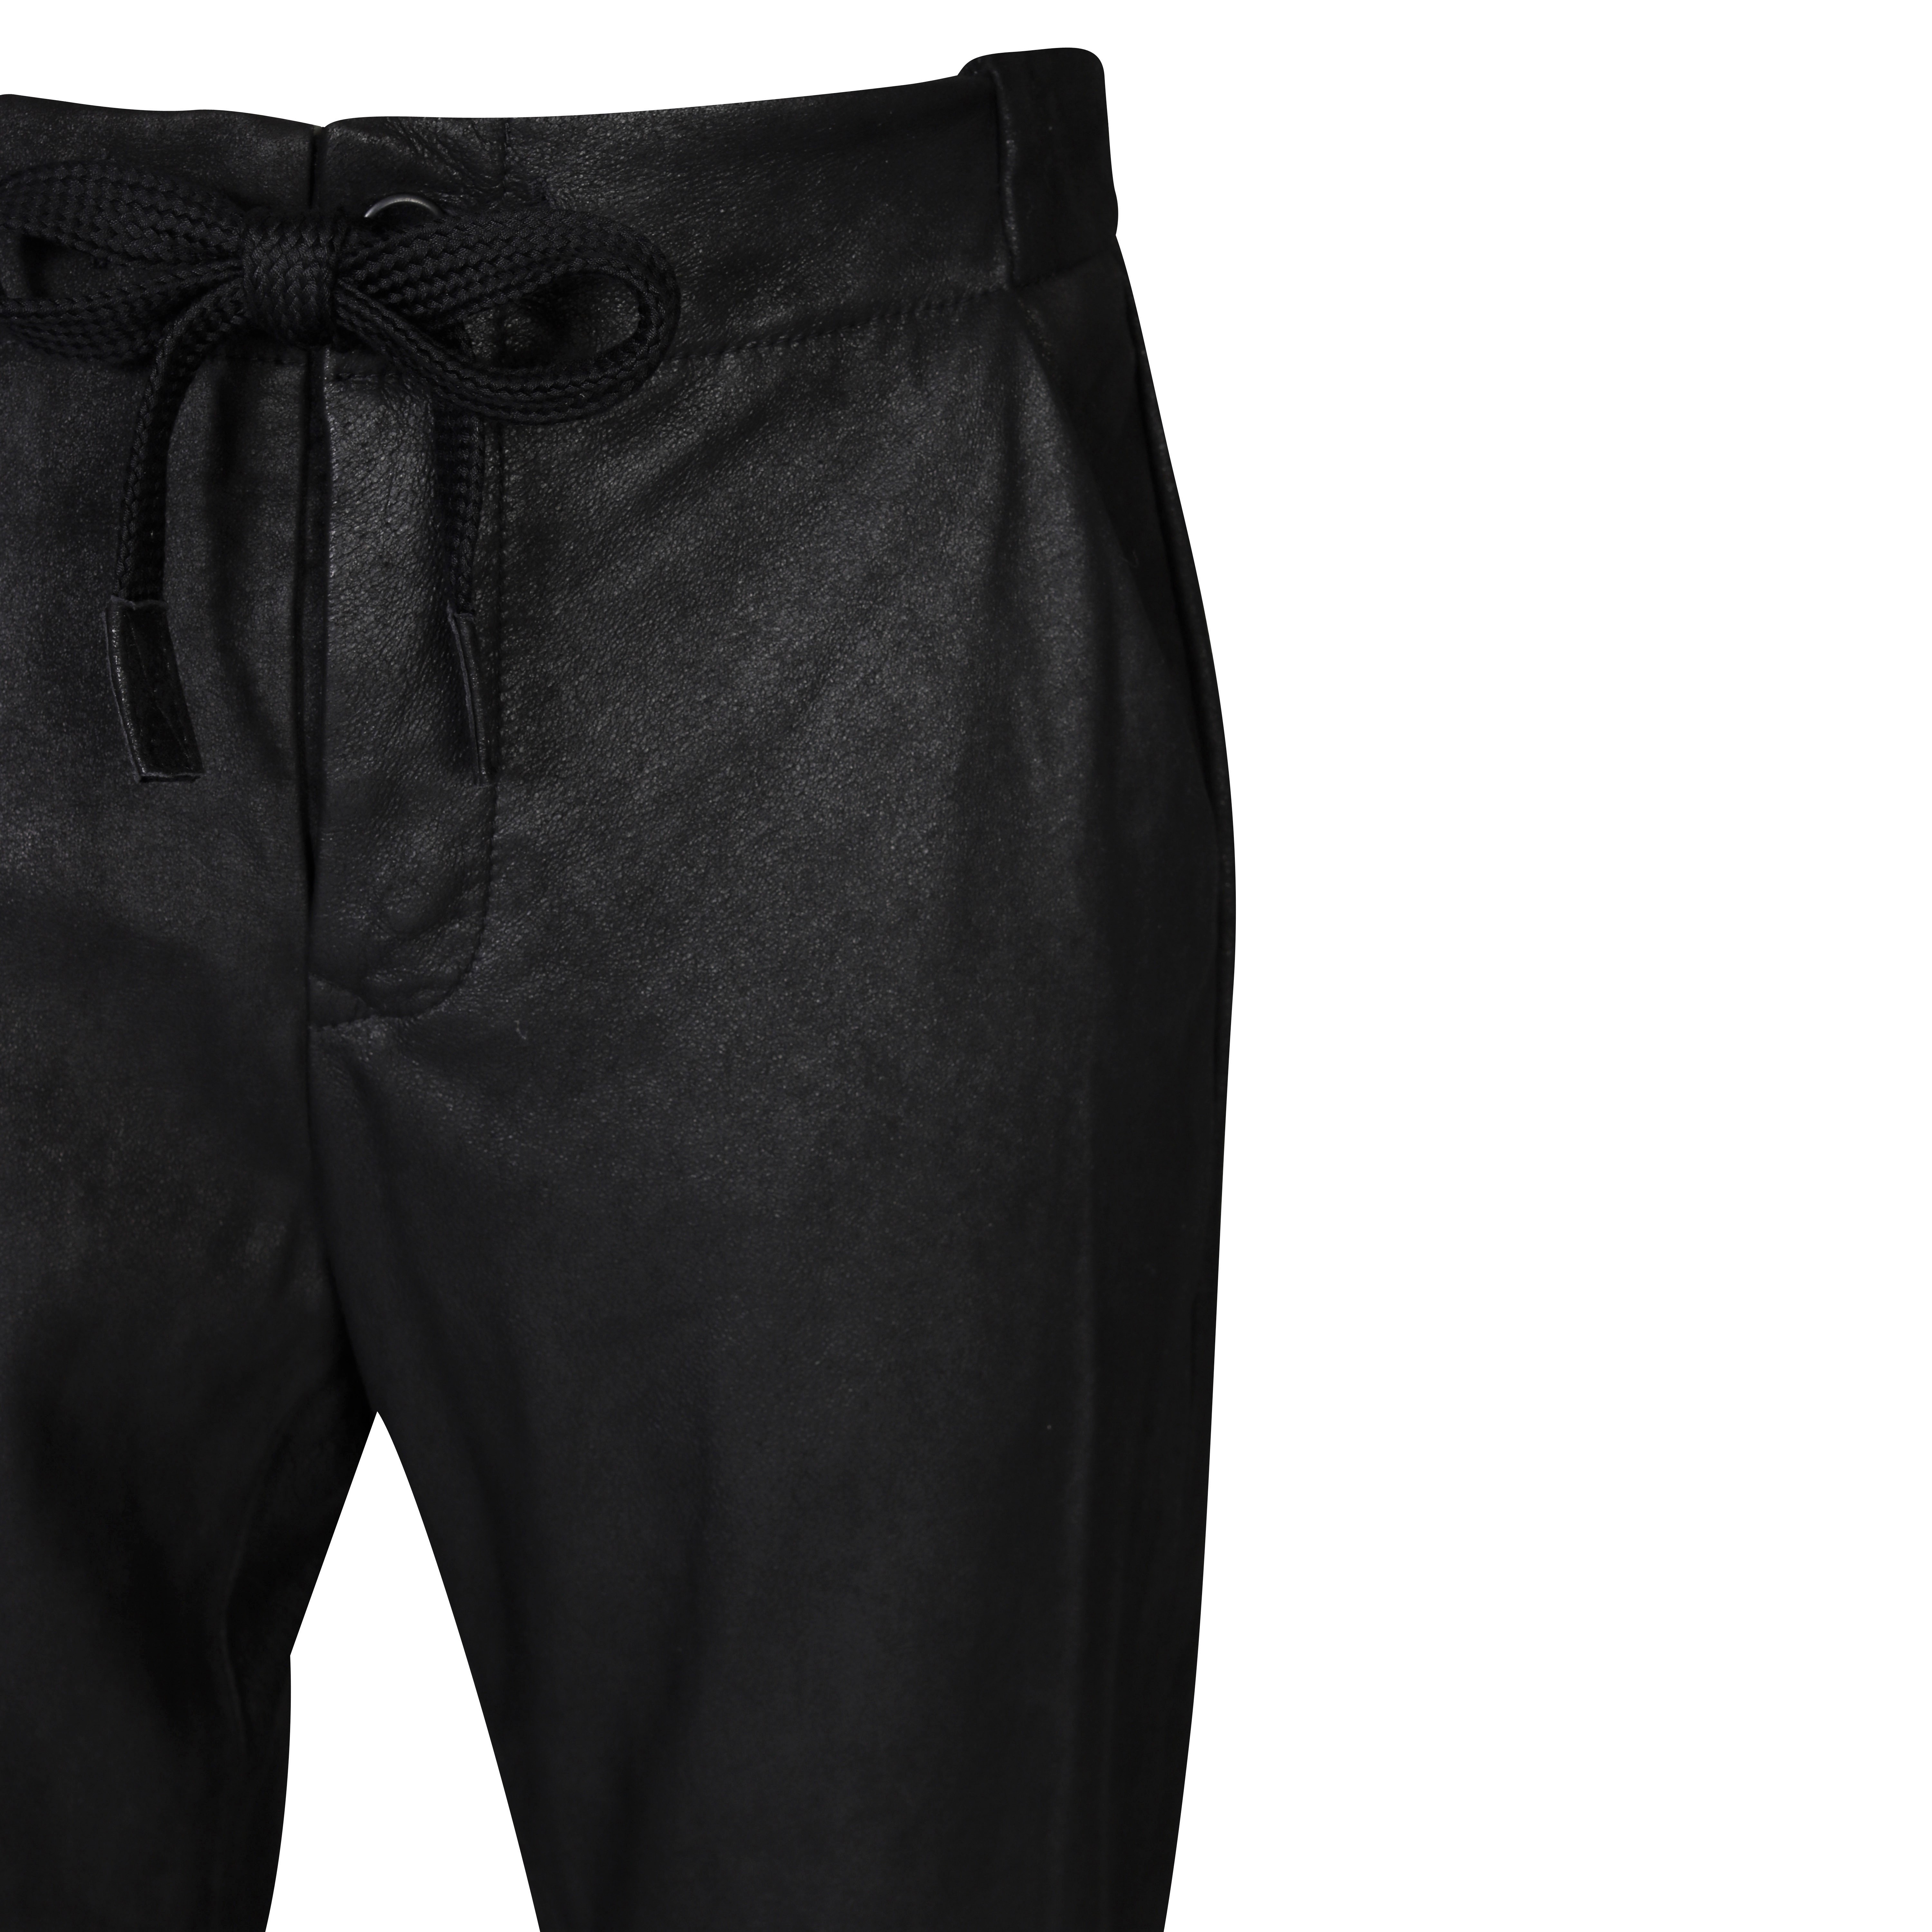 Hannes Roether Leather Pant in Black